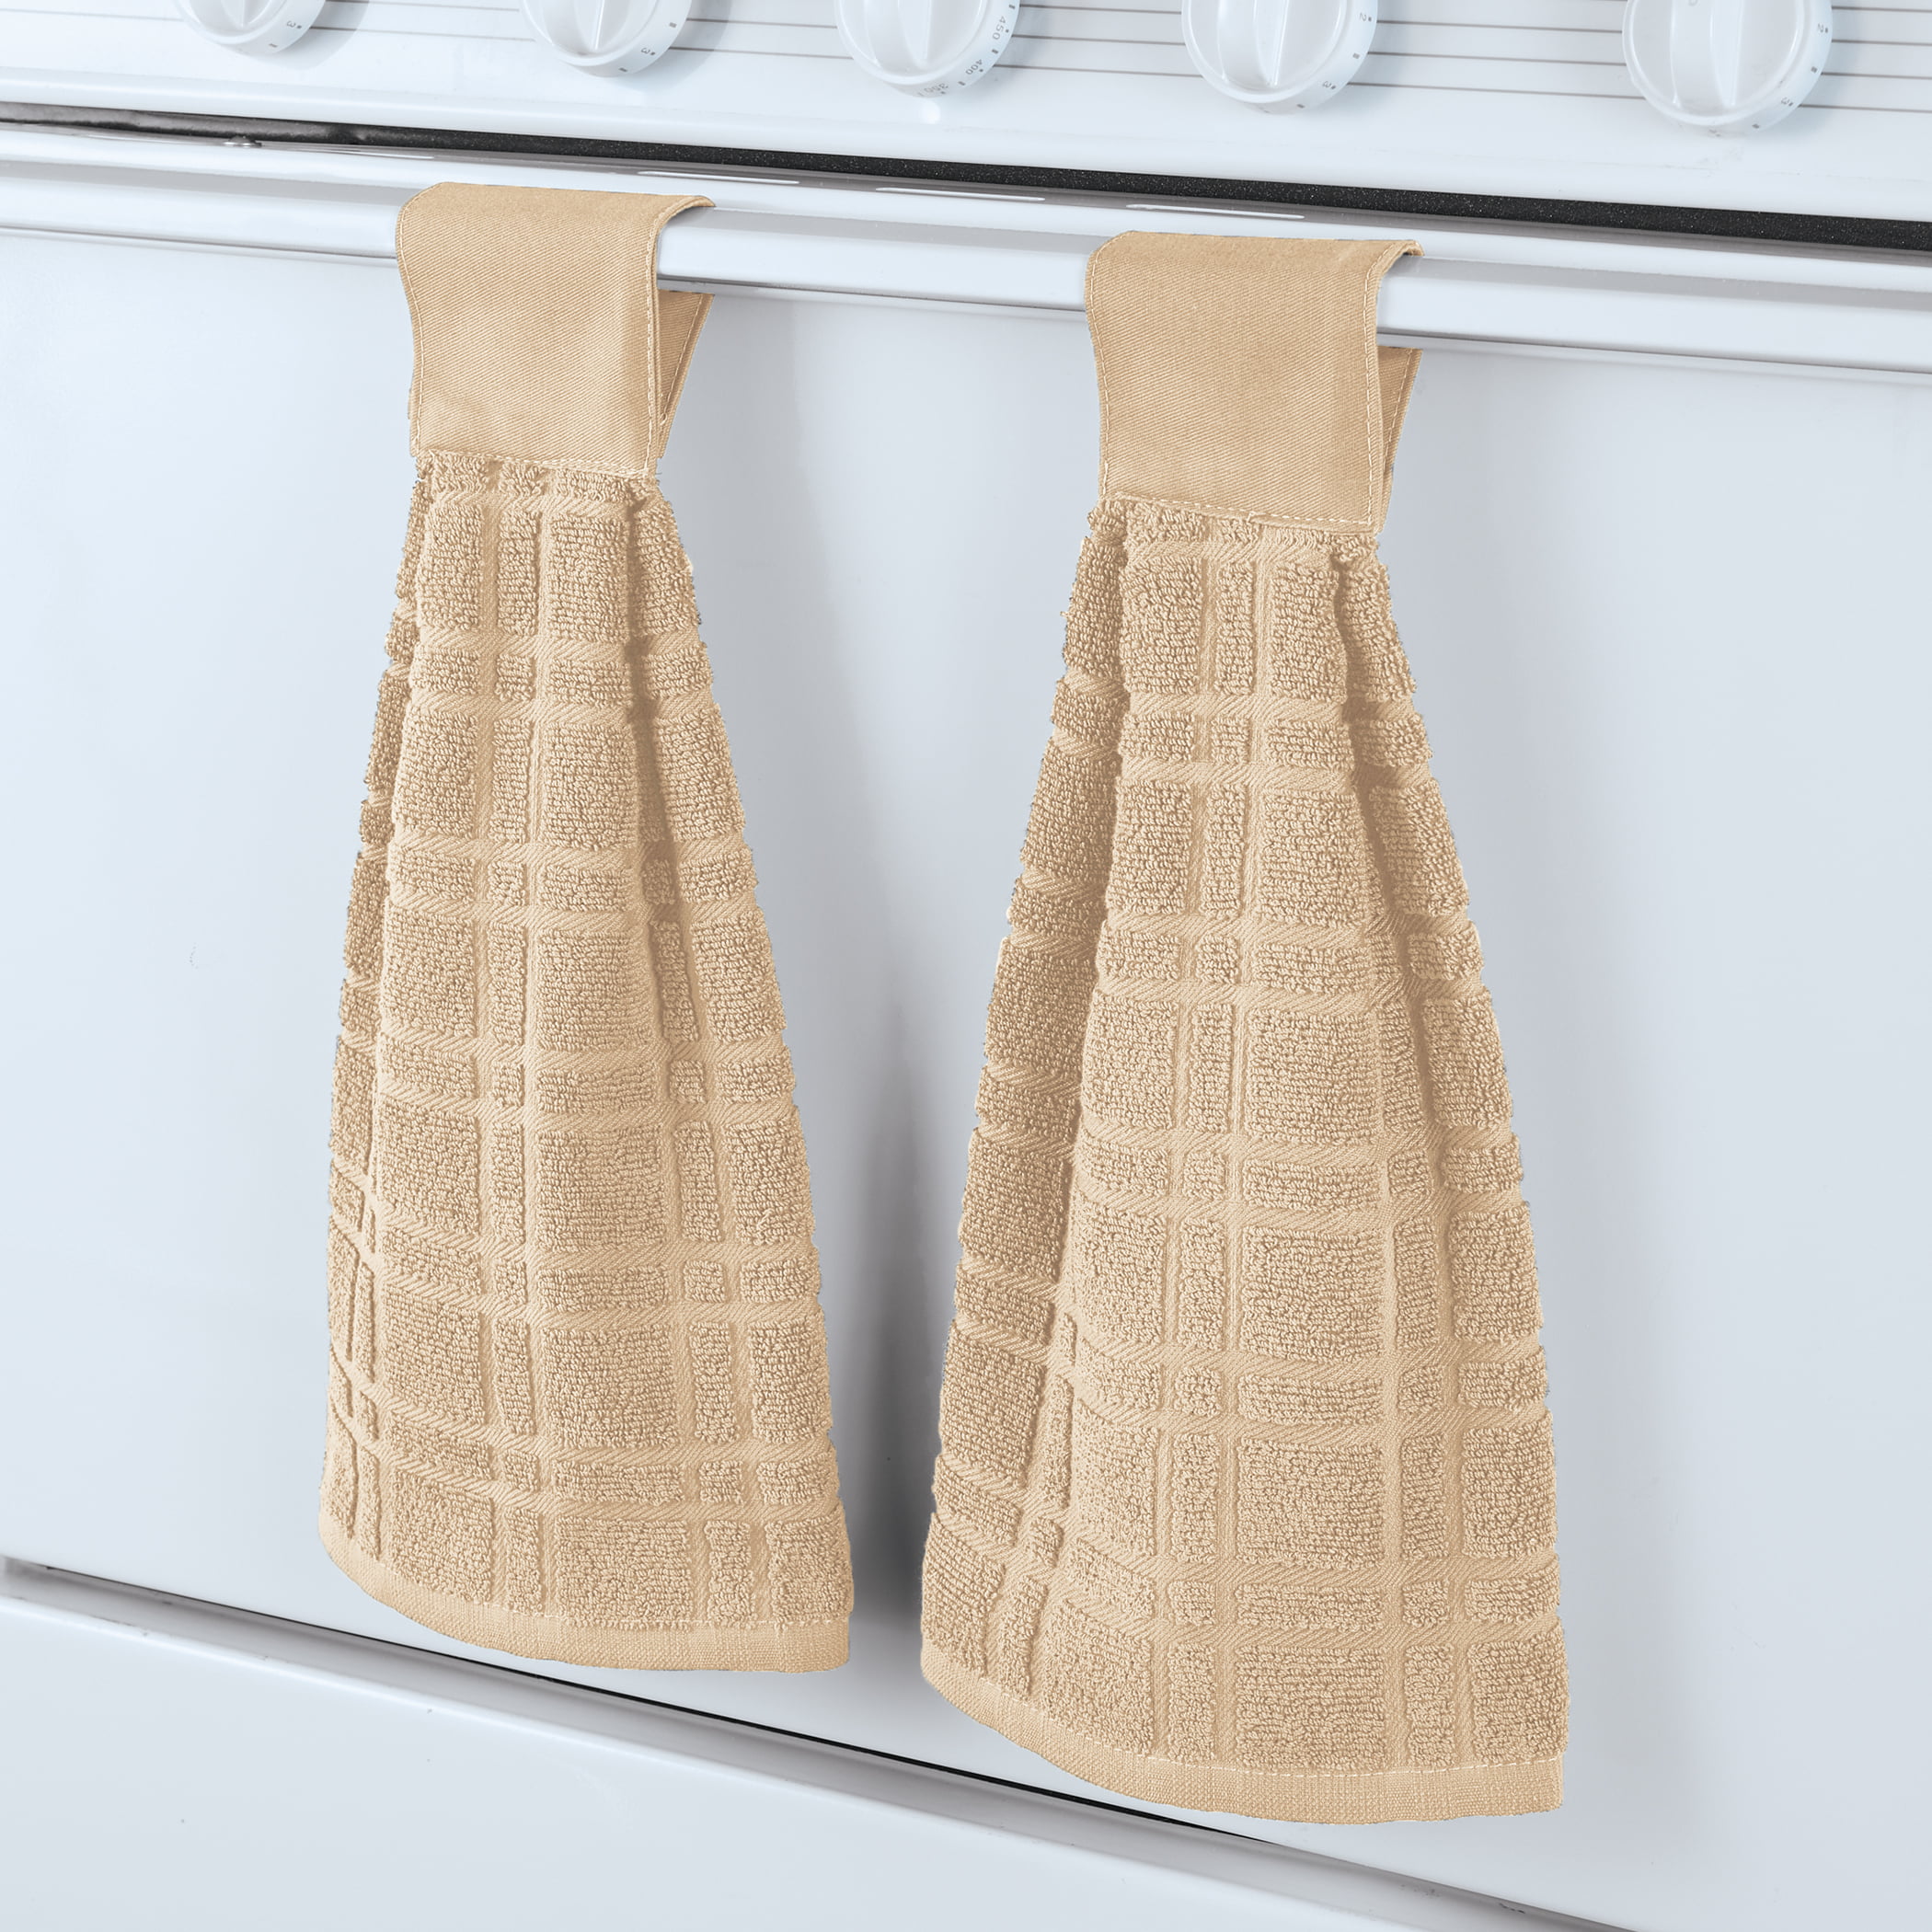 Kitchy Kitchen Towel, kitchen hanging hand tie towel, never falls off,  17x27, TM(4), copyright 2019 — Comfy Kitchen Creations